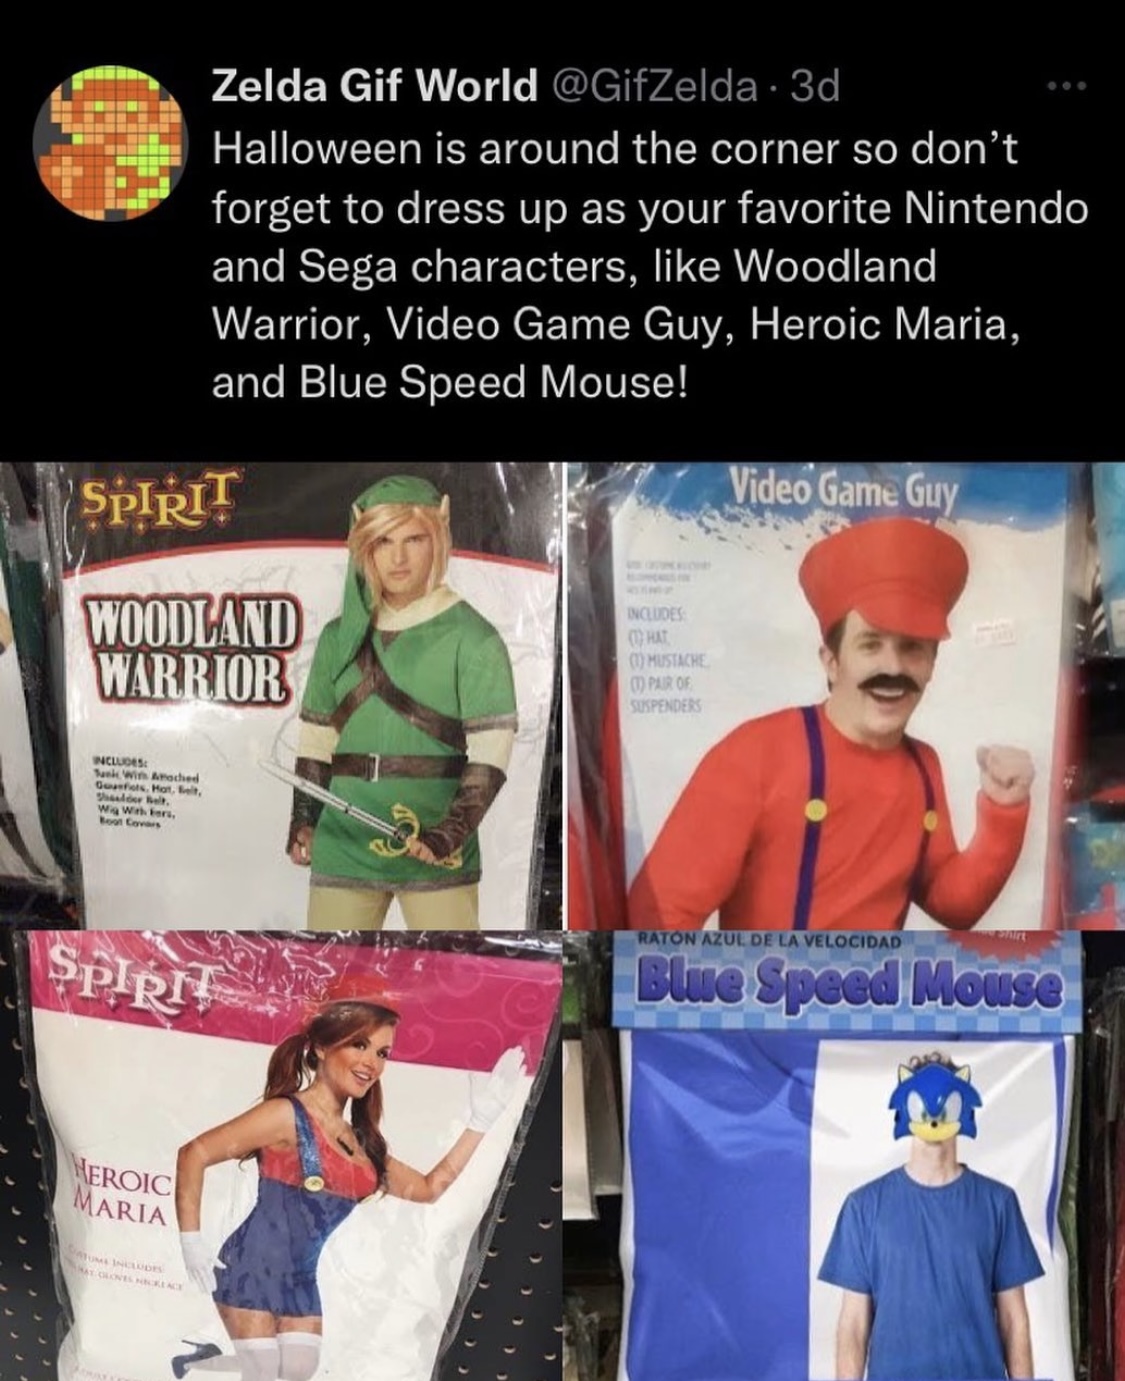 halloween is around the corner so don't forget to dress up as your favorite nintendo and sega characters, like woodland warrior, video game guy, heroic mania, blue speed mouse